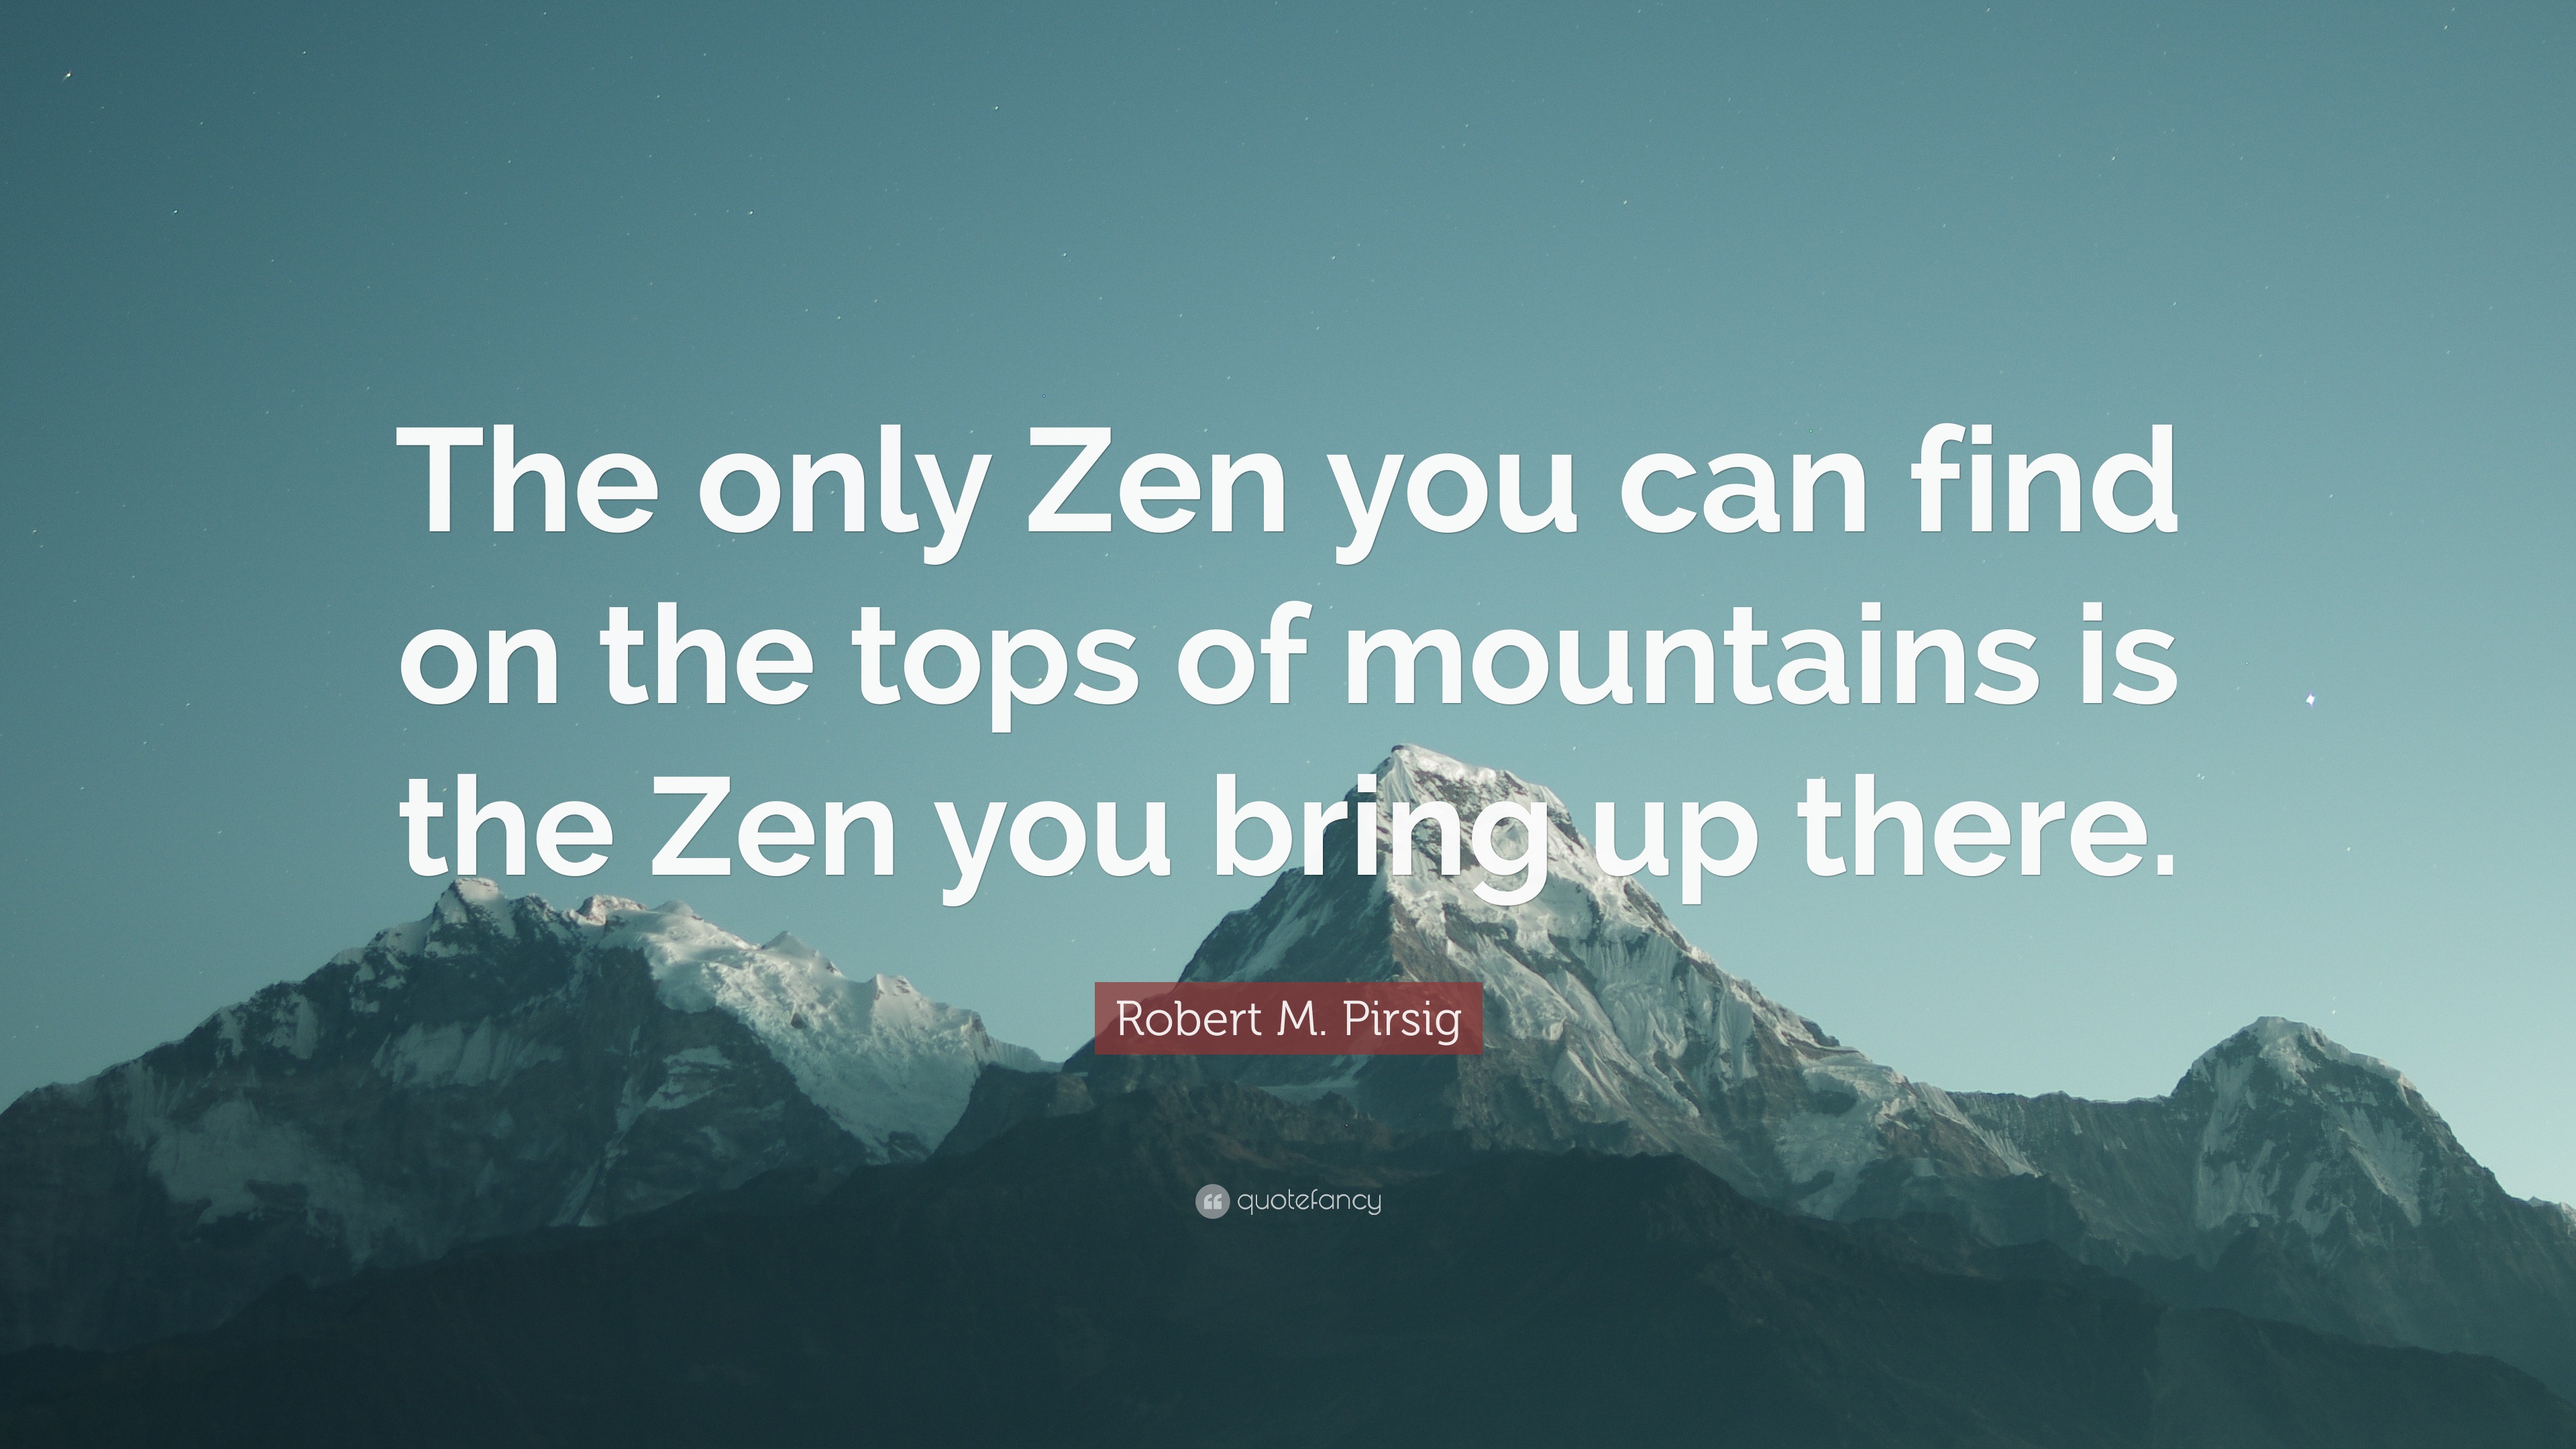 Robert M Pirsig Quote The Only Zen You Can Find On The Tops Of